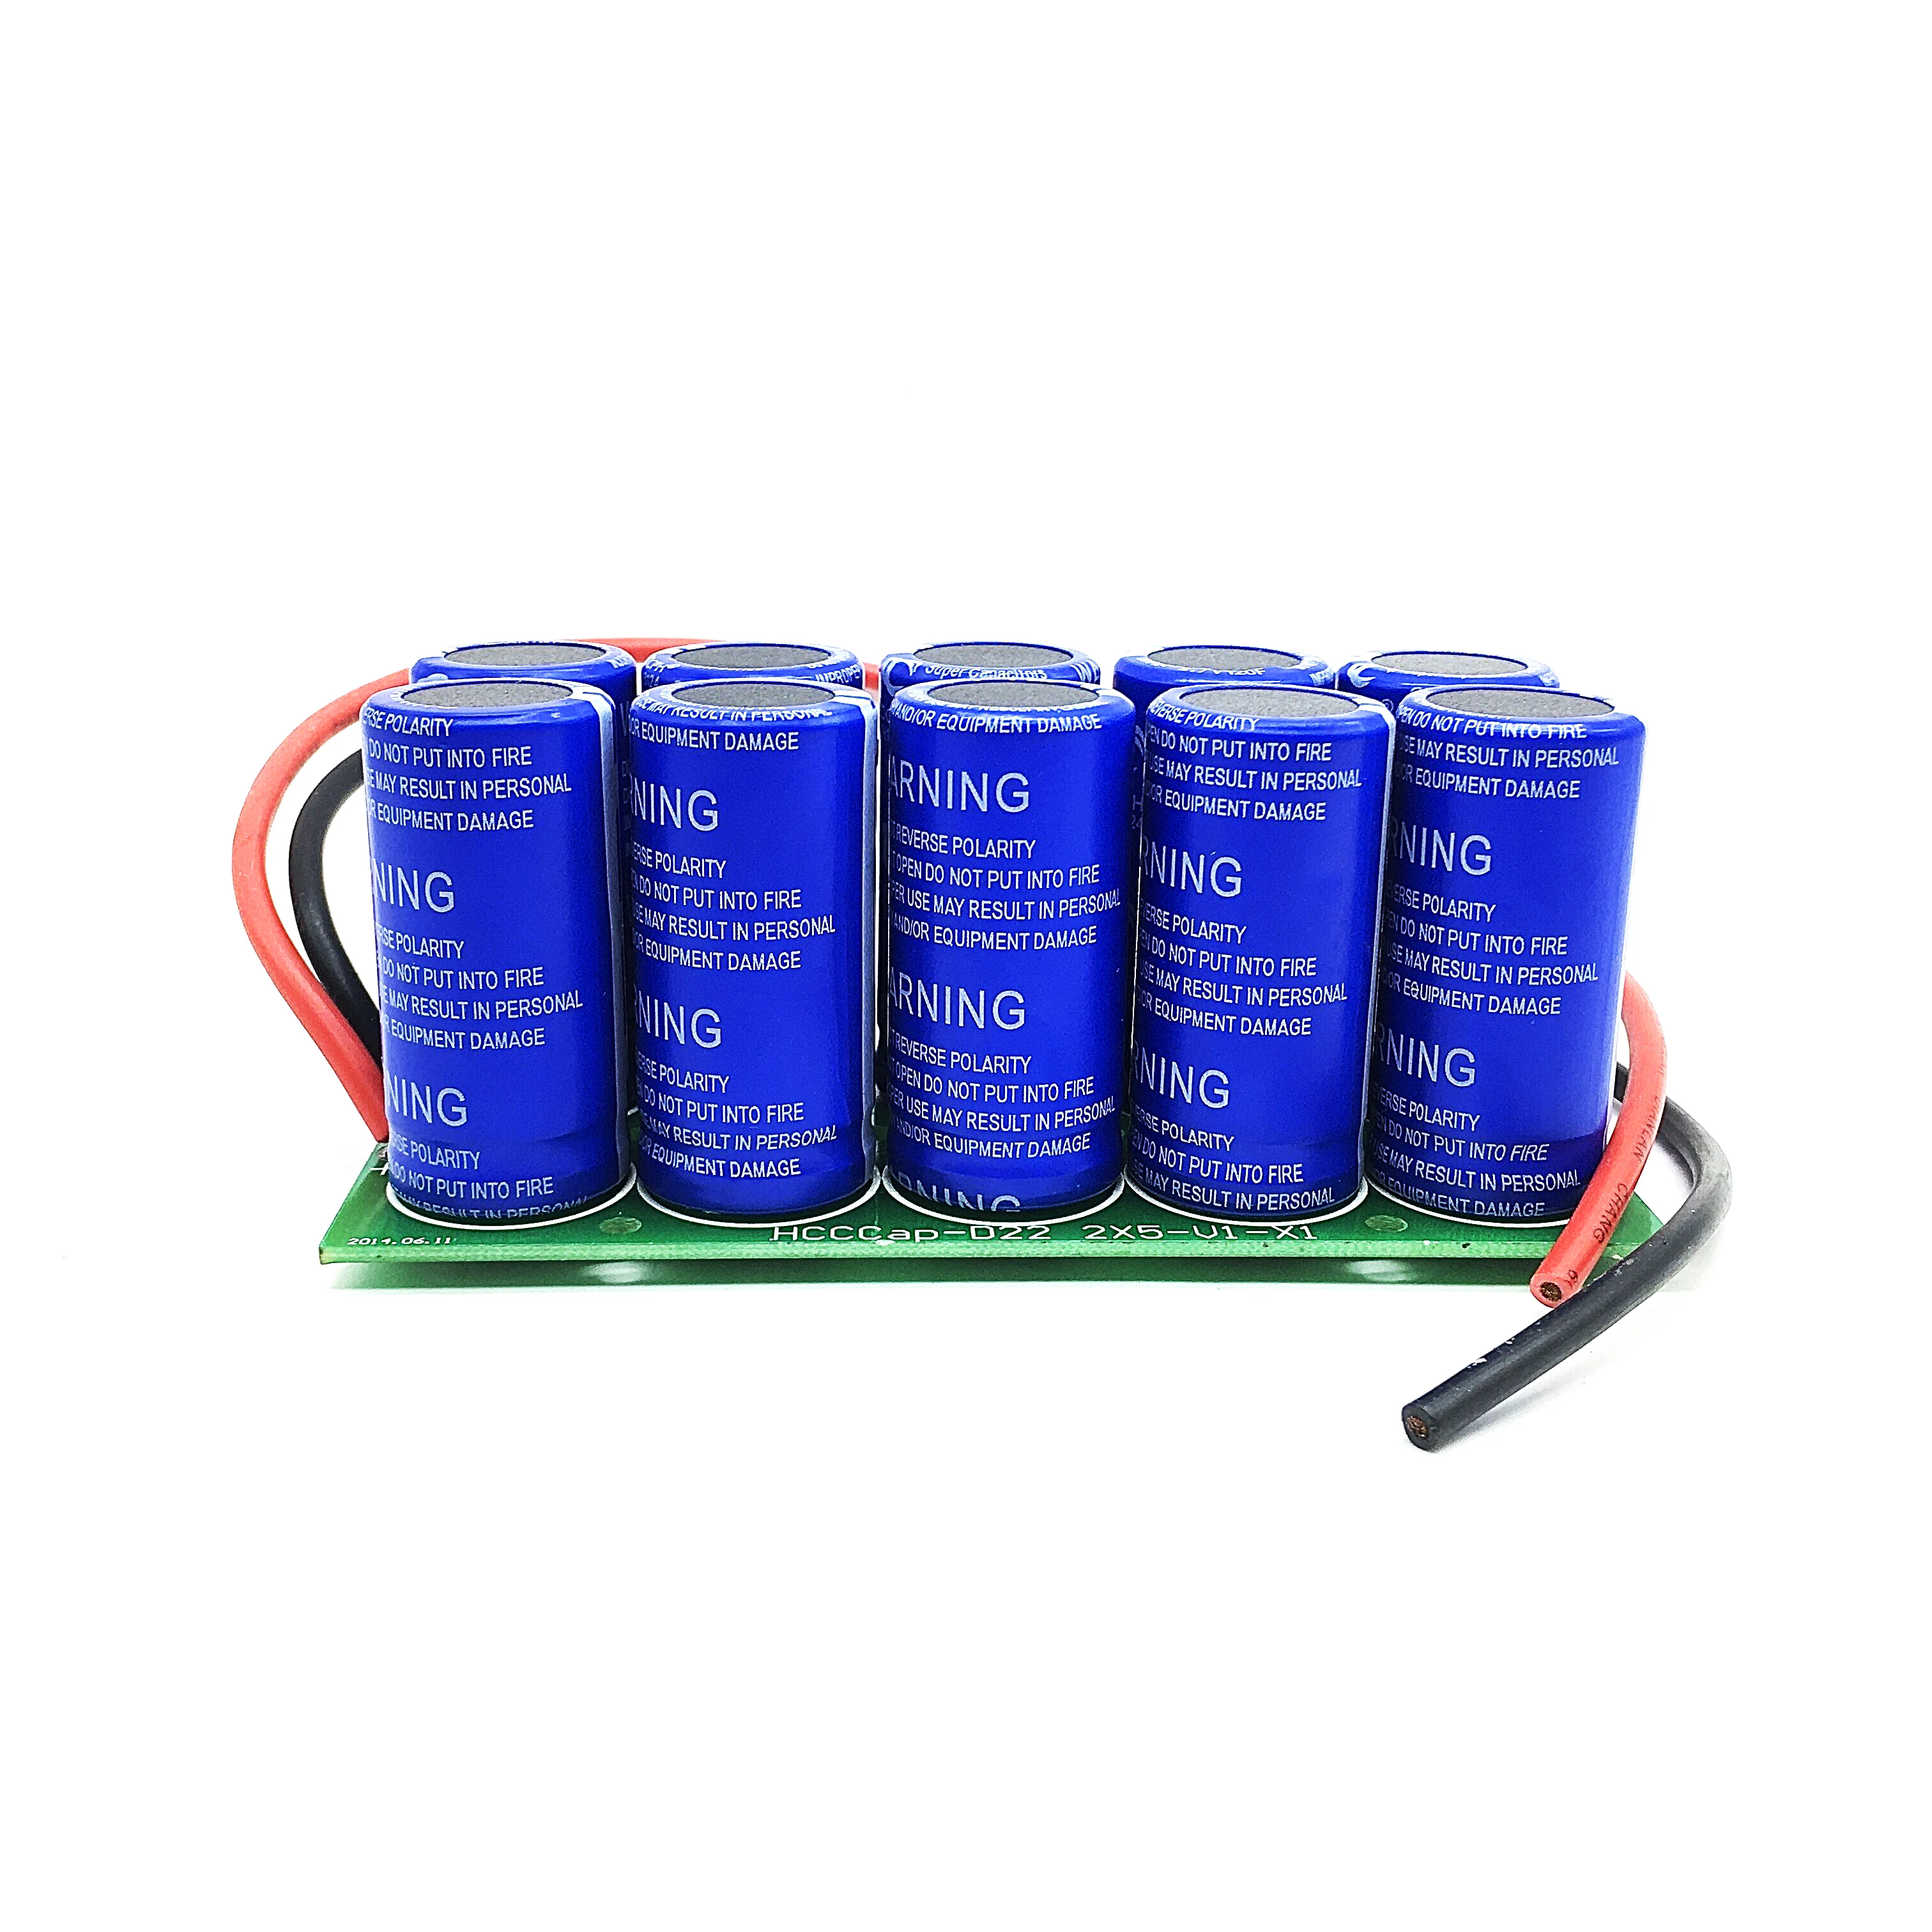 Super Capacitors Farad Capacitor Modules 27V 12F SuperCapacitors With Double Protection Board With Line UltraCapacitor 10 pcs set laser receiver sensor module ky 008 laser transmitter modules for arduino avr sensor module board tool accessories